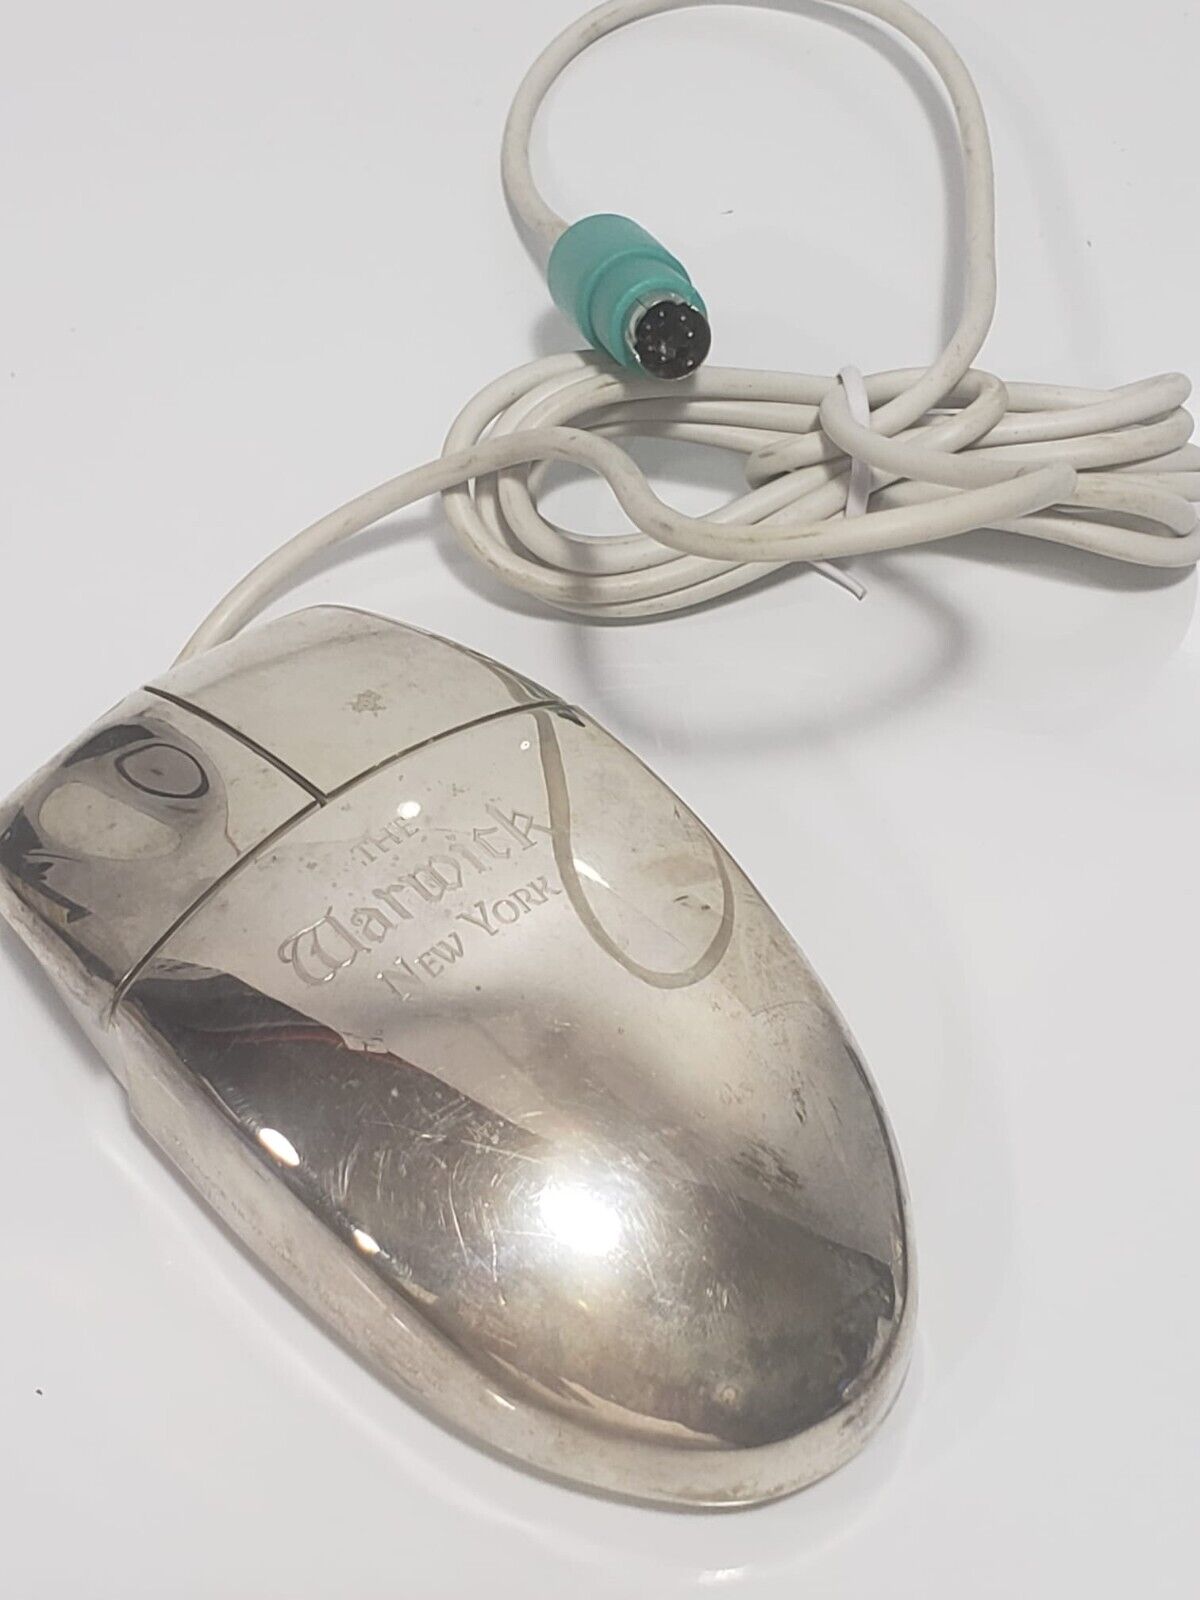 Rare Vintage 'The Warwick New York' PS/2 Mouse Silver Plated Model MUO6P